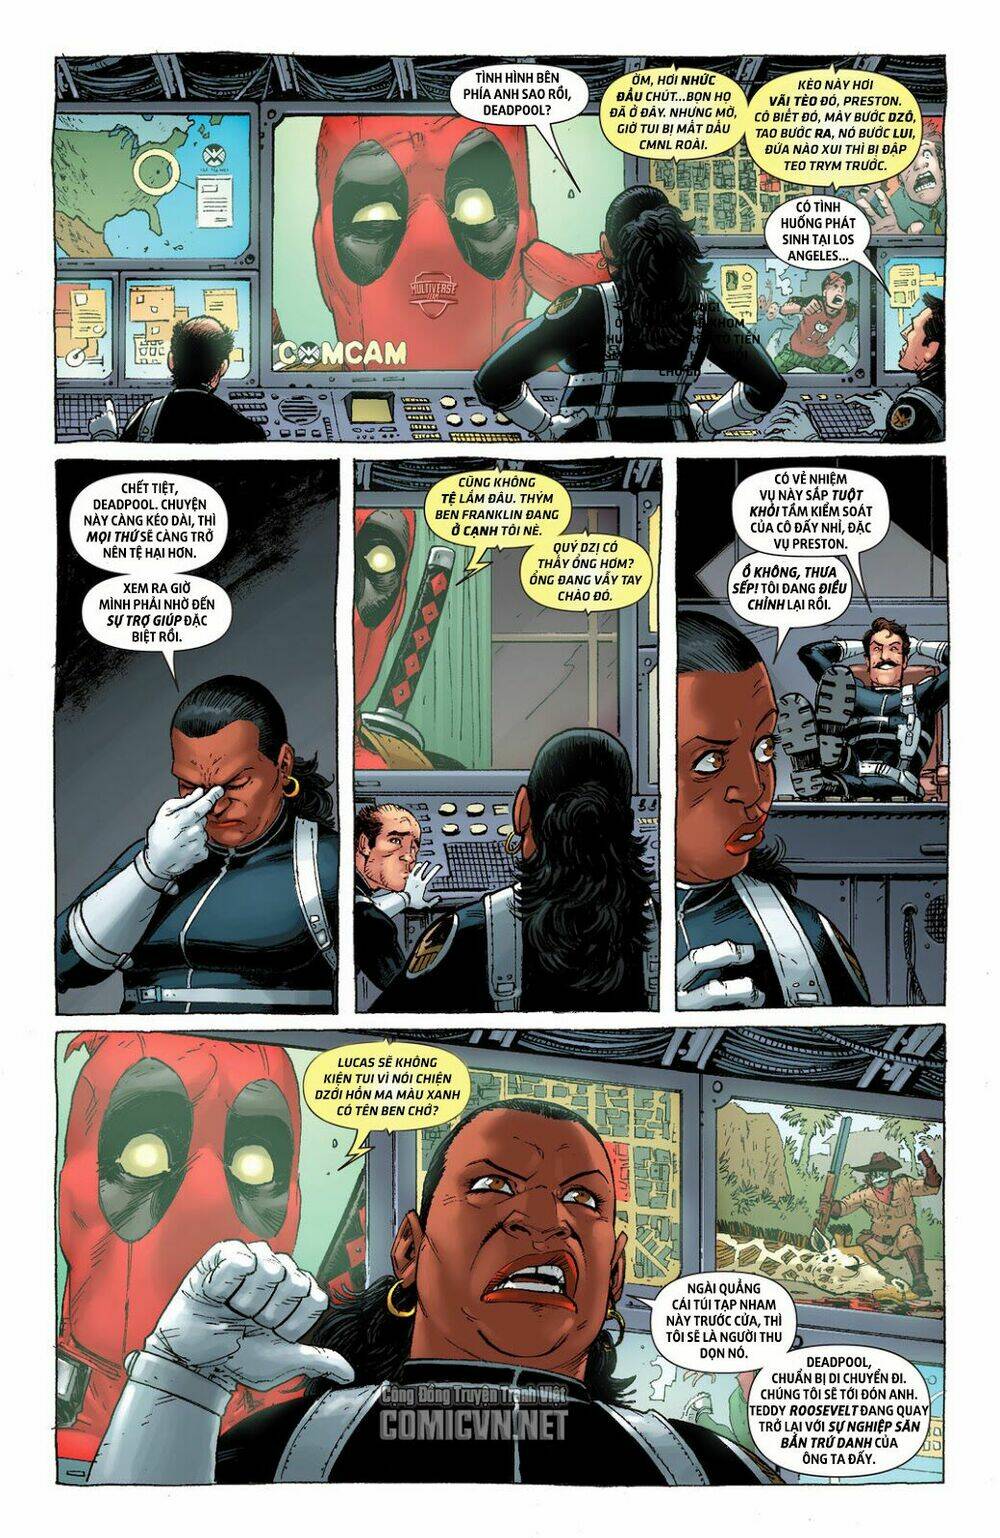 Deadpool 2012 Chapter 2: - We Fought A Zoo - Part 1 - Trang 11